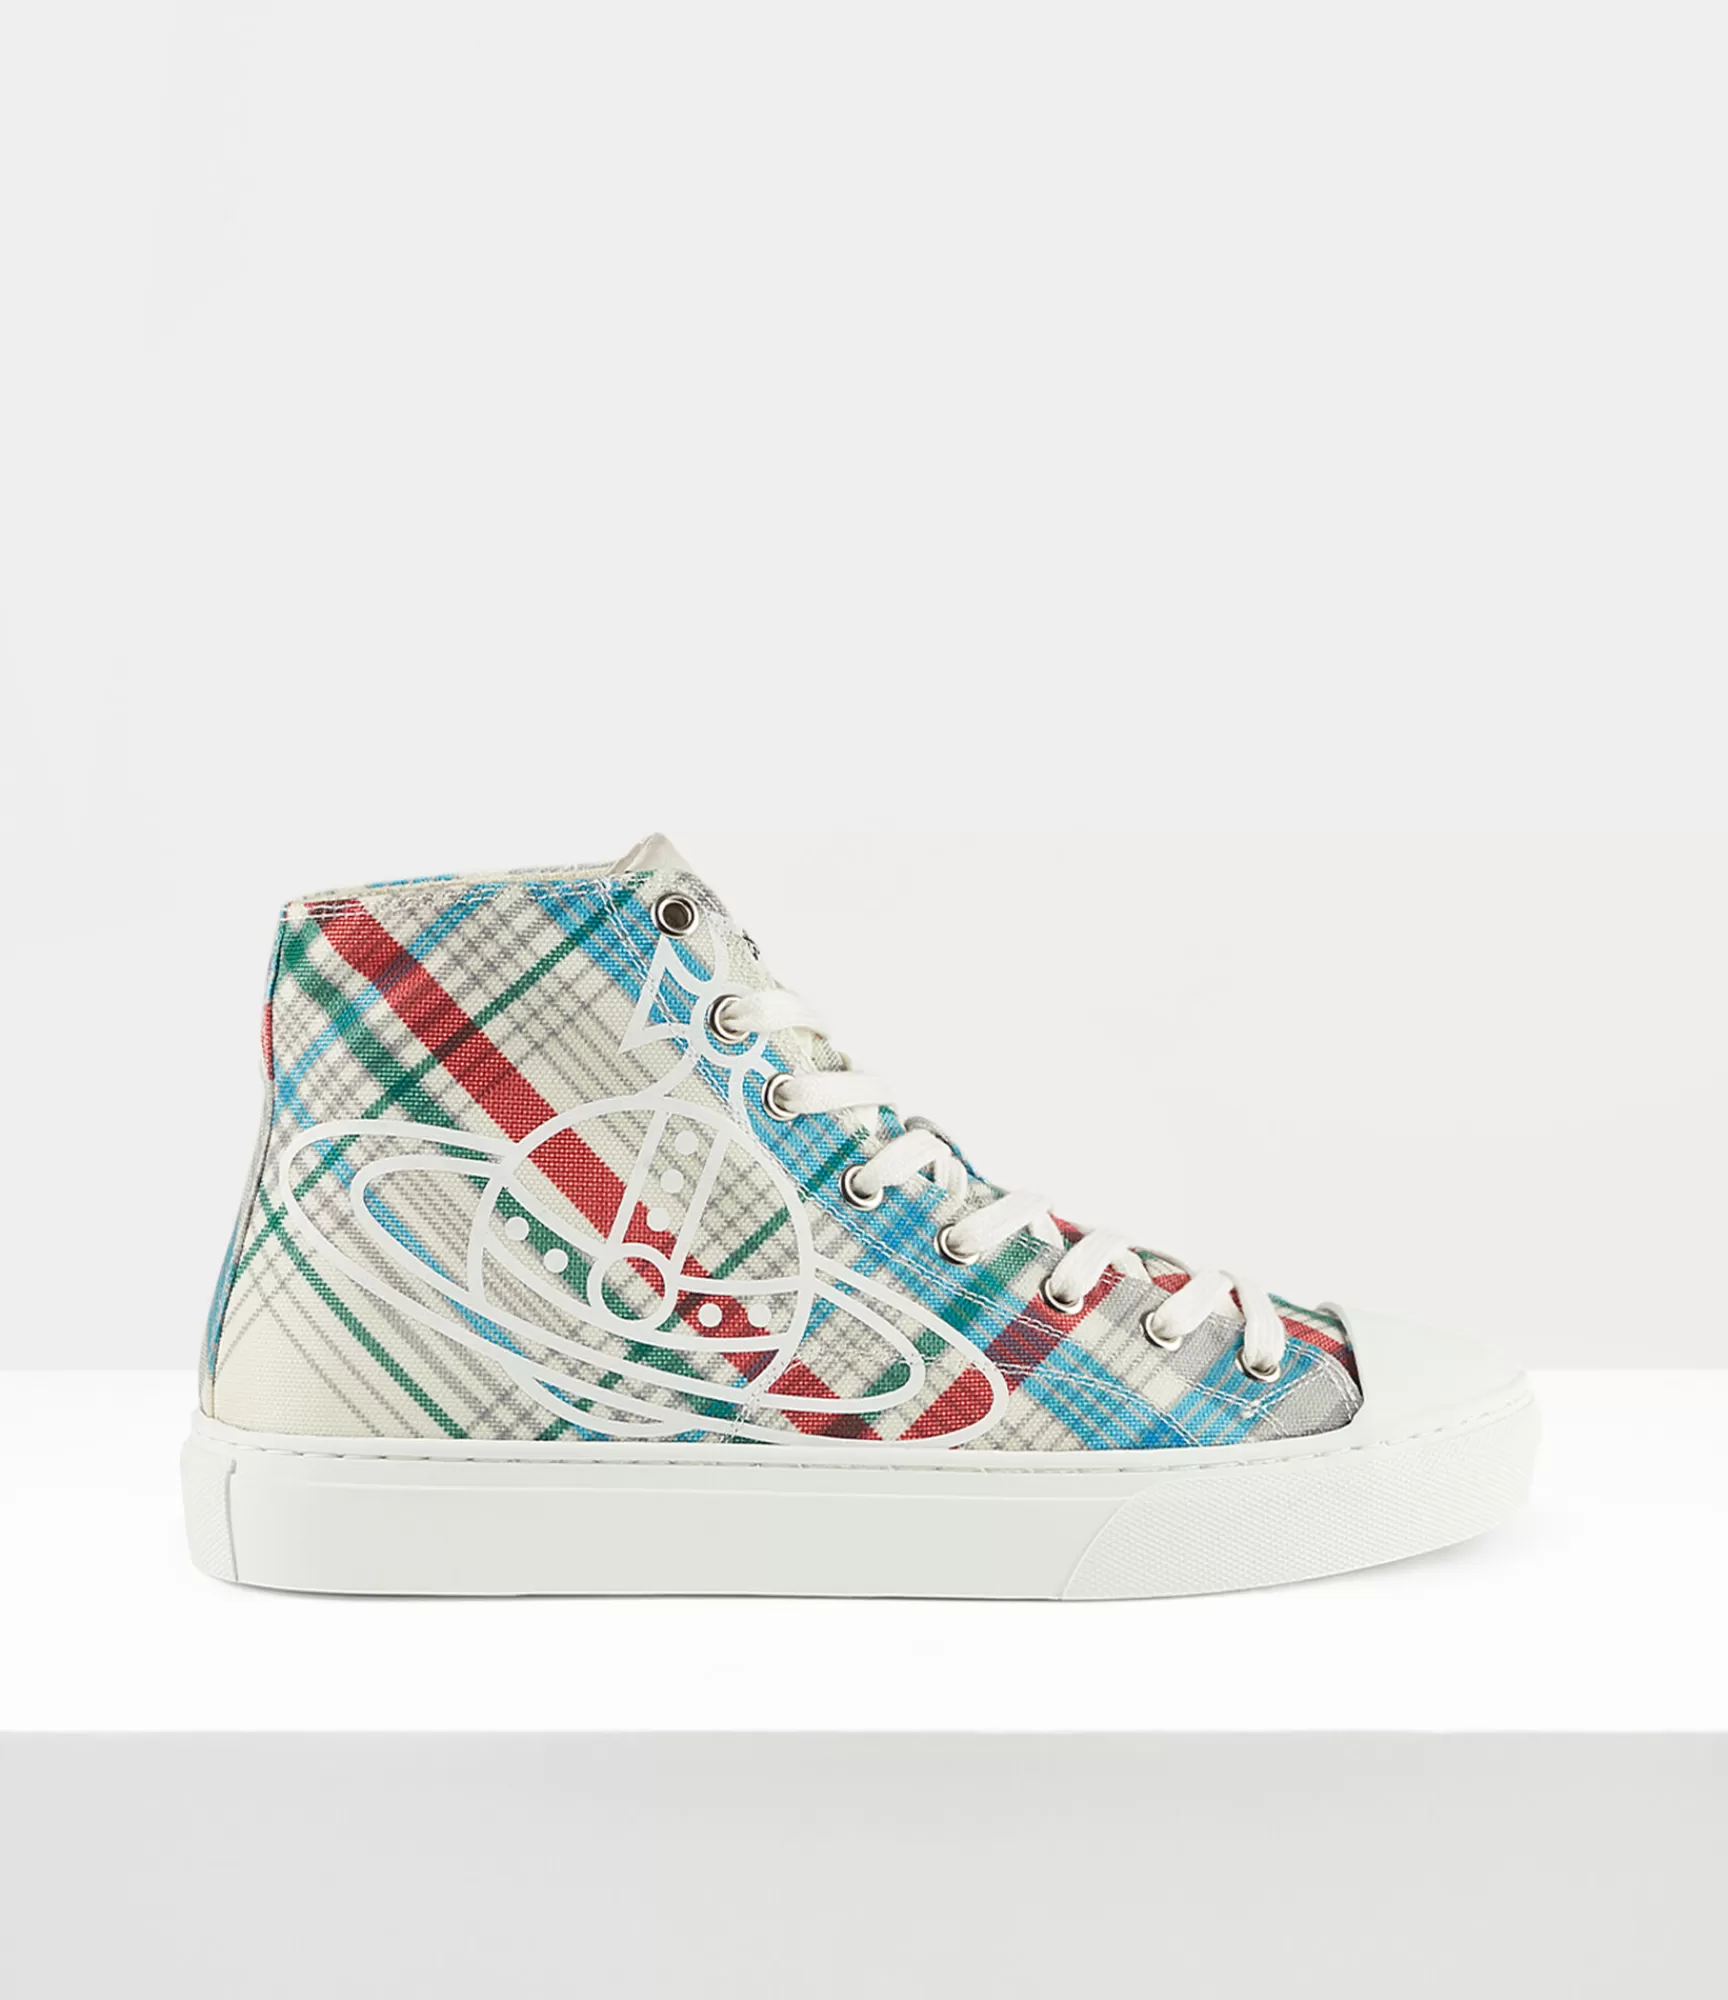 Vivienne Westwood Trainers*Plimsoll high top Madras Check